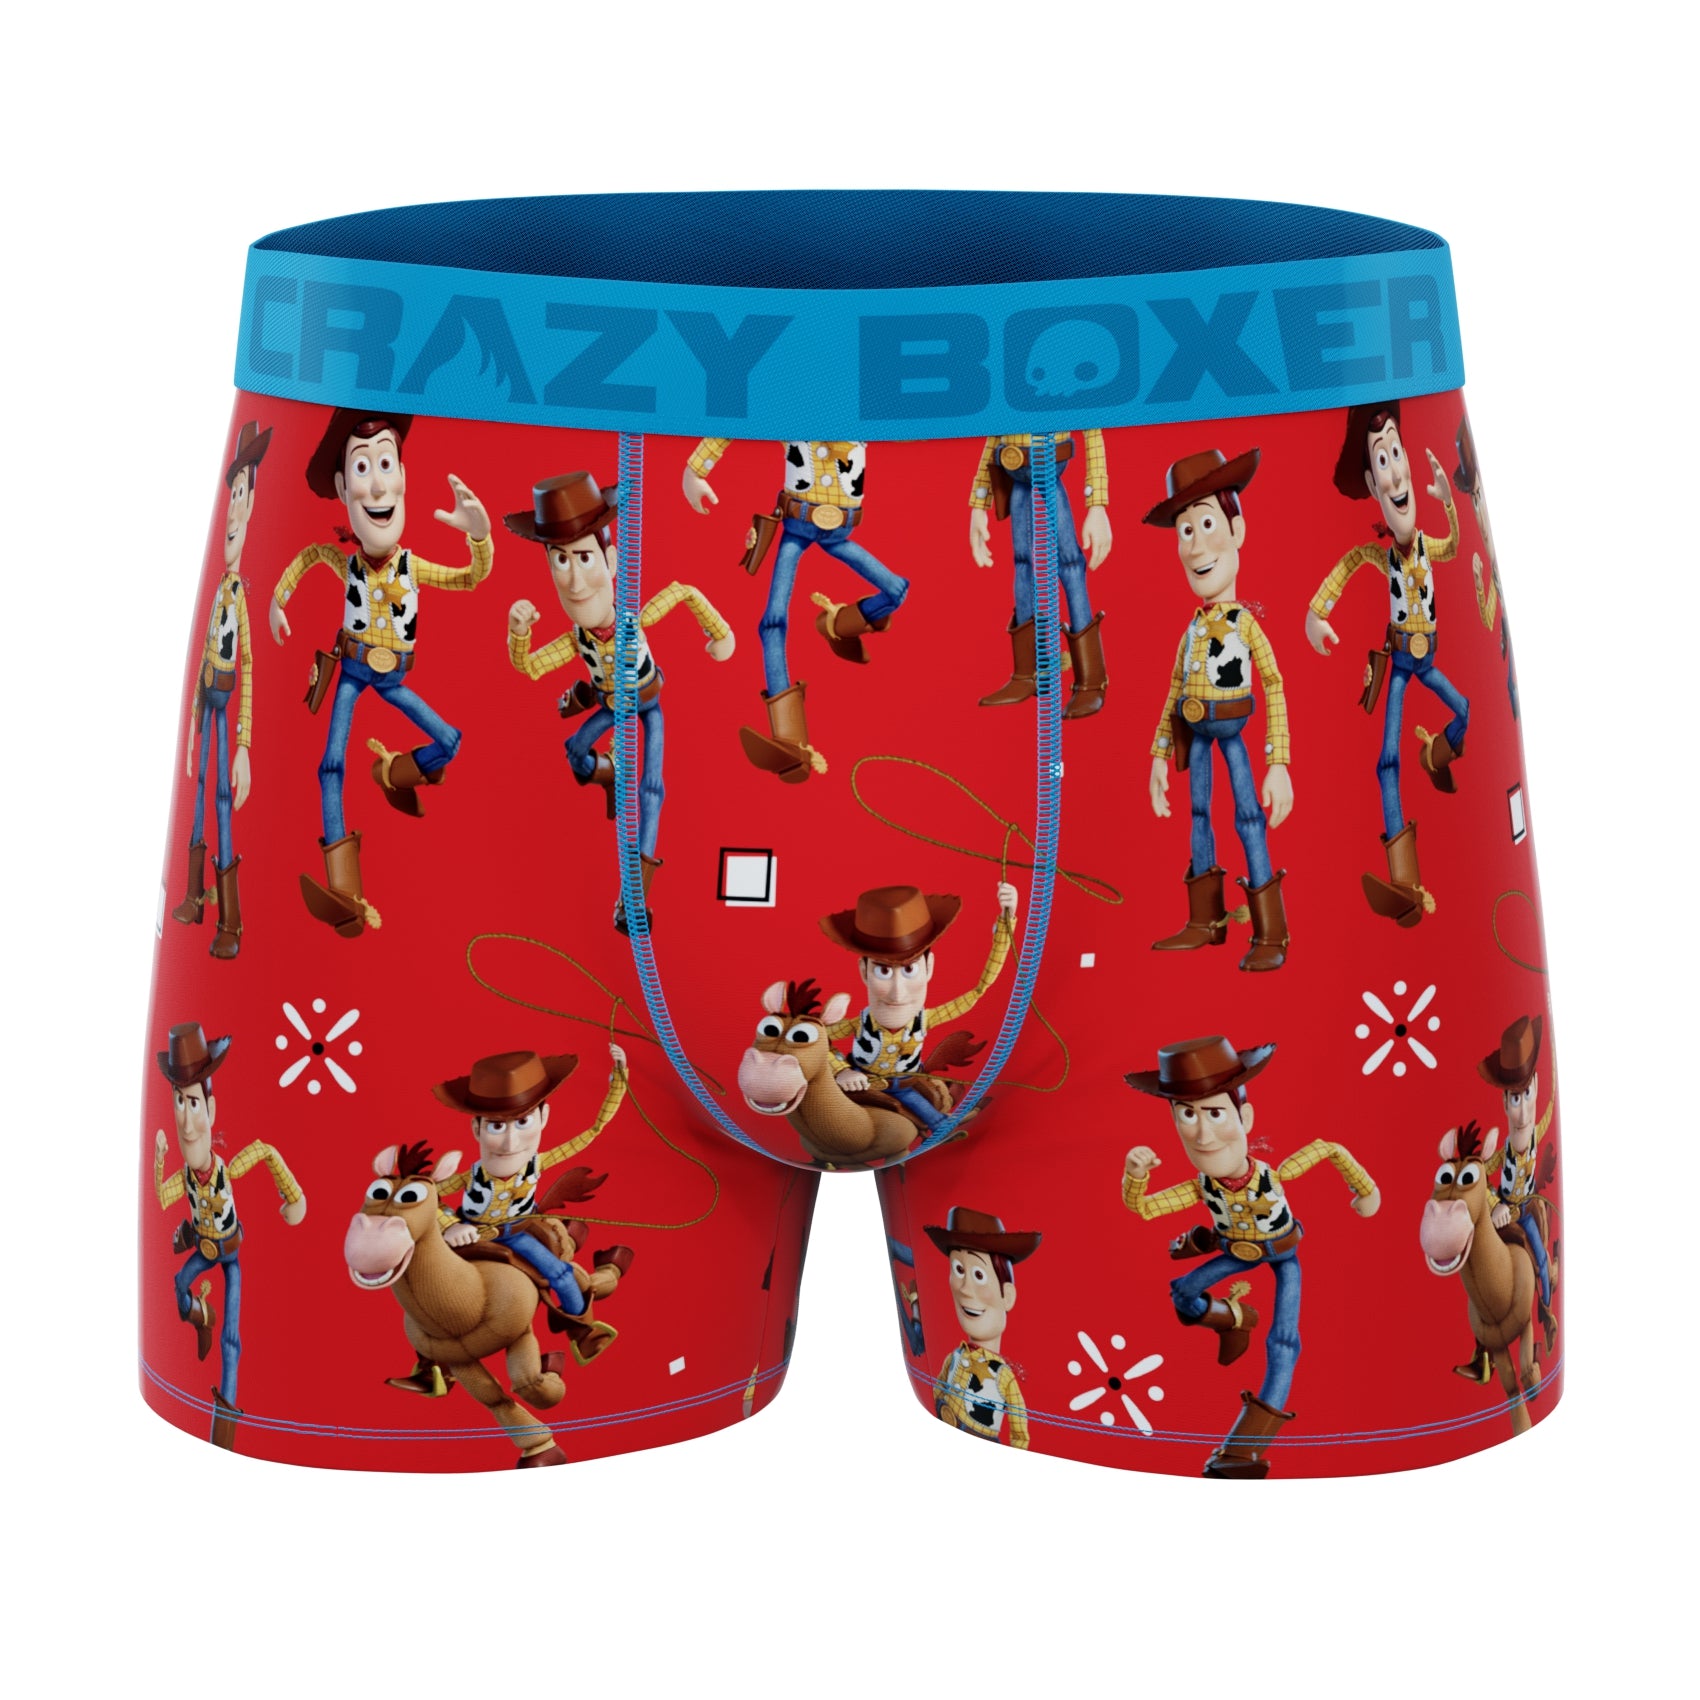 CRAZYBOXER Toy Story All Characters; Men's Boxer Briefs, 3-Pack 